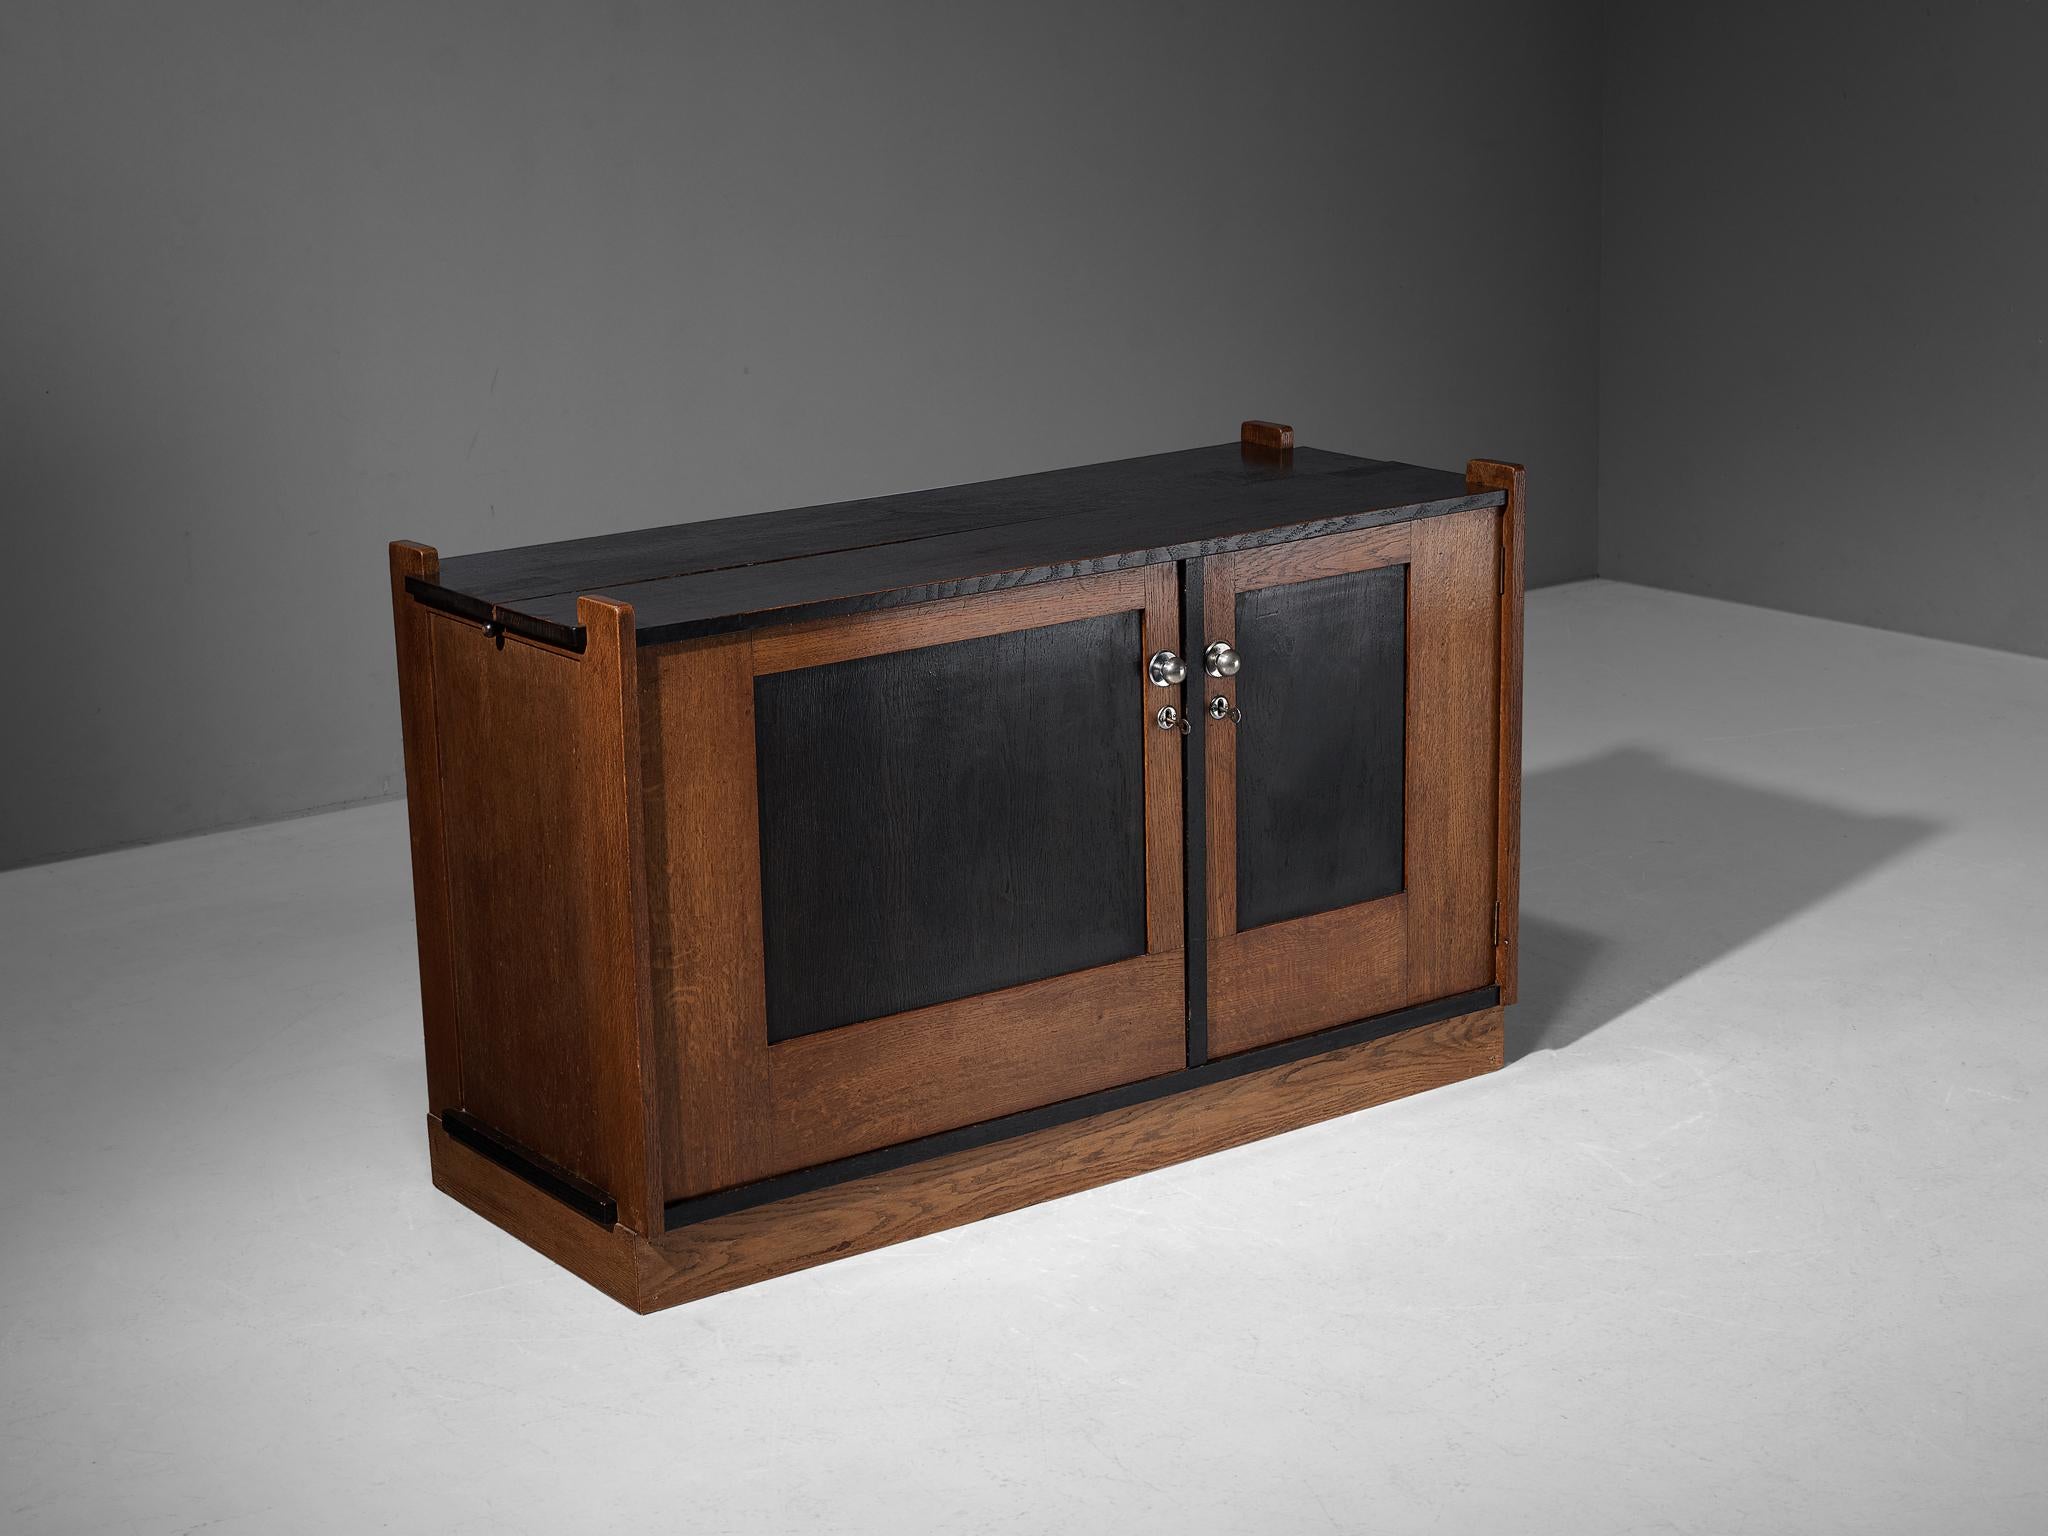 Cor Alons cabinet, manufactured by Winterkamp en van Putten, oak, stained oak, The Netherlands, 1927

This cabinet was designed by Cor Alons, in the period of the 'Hague School', a movement that emphasized geometric shapes, simple proportions and